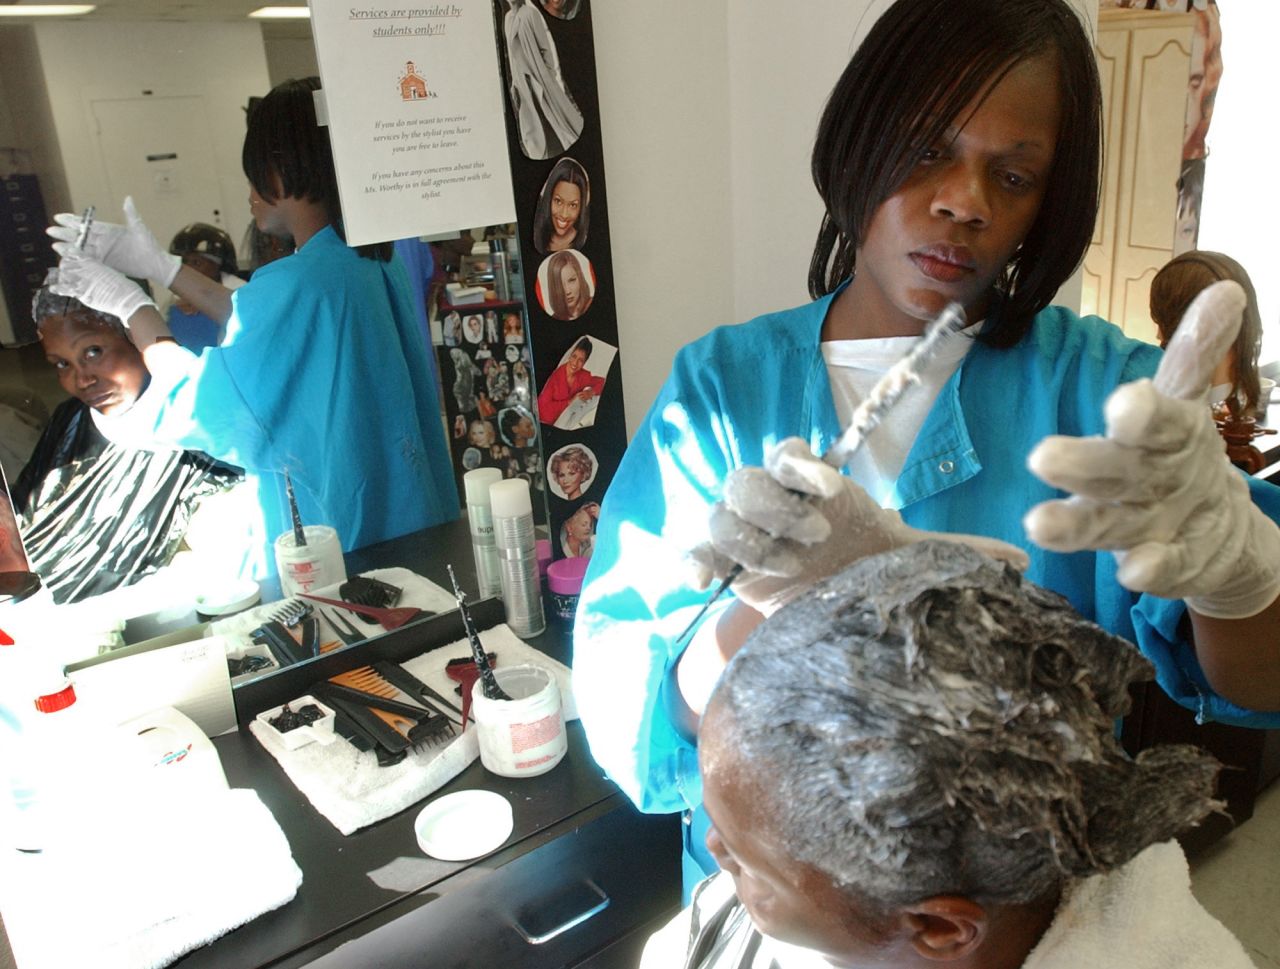 A cosmetology class in progress at Metro State Prison in Atlanta, where inmates practice hairdressing.